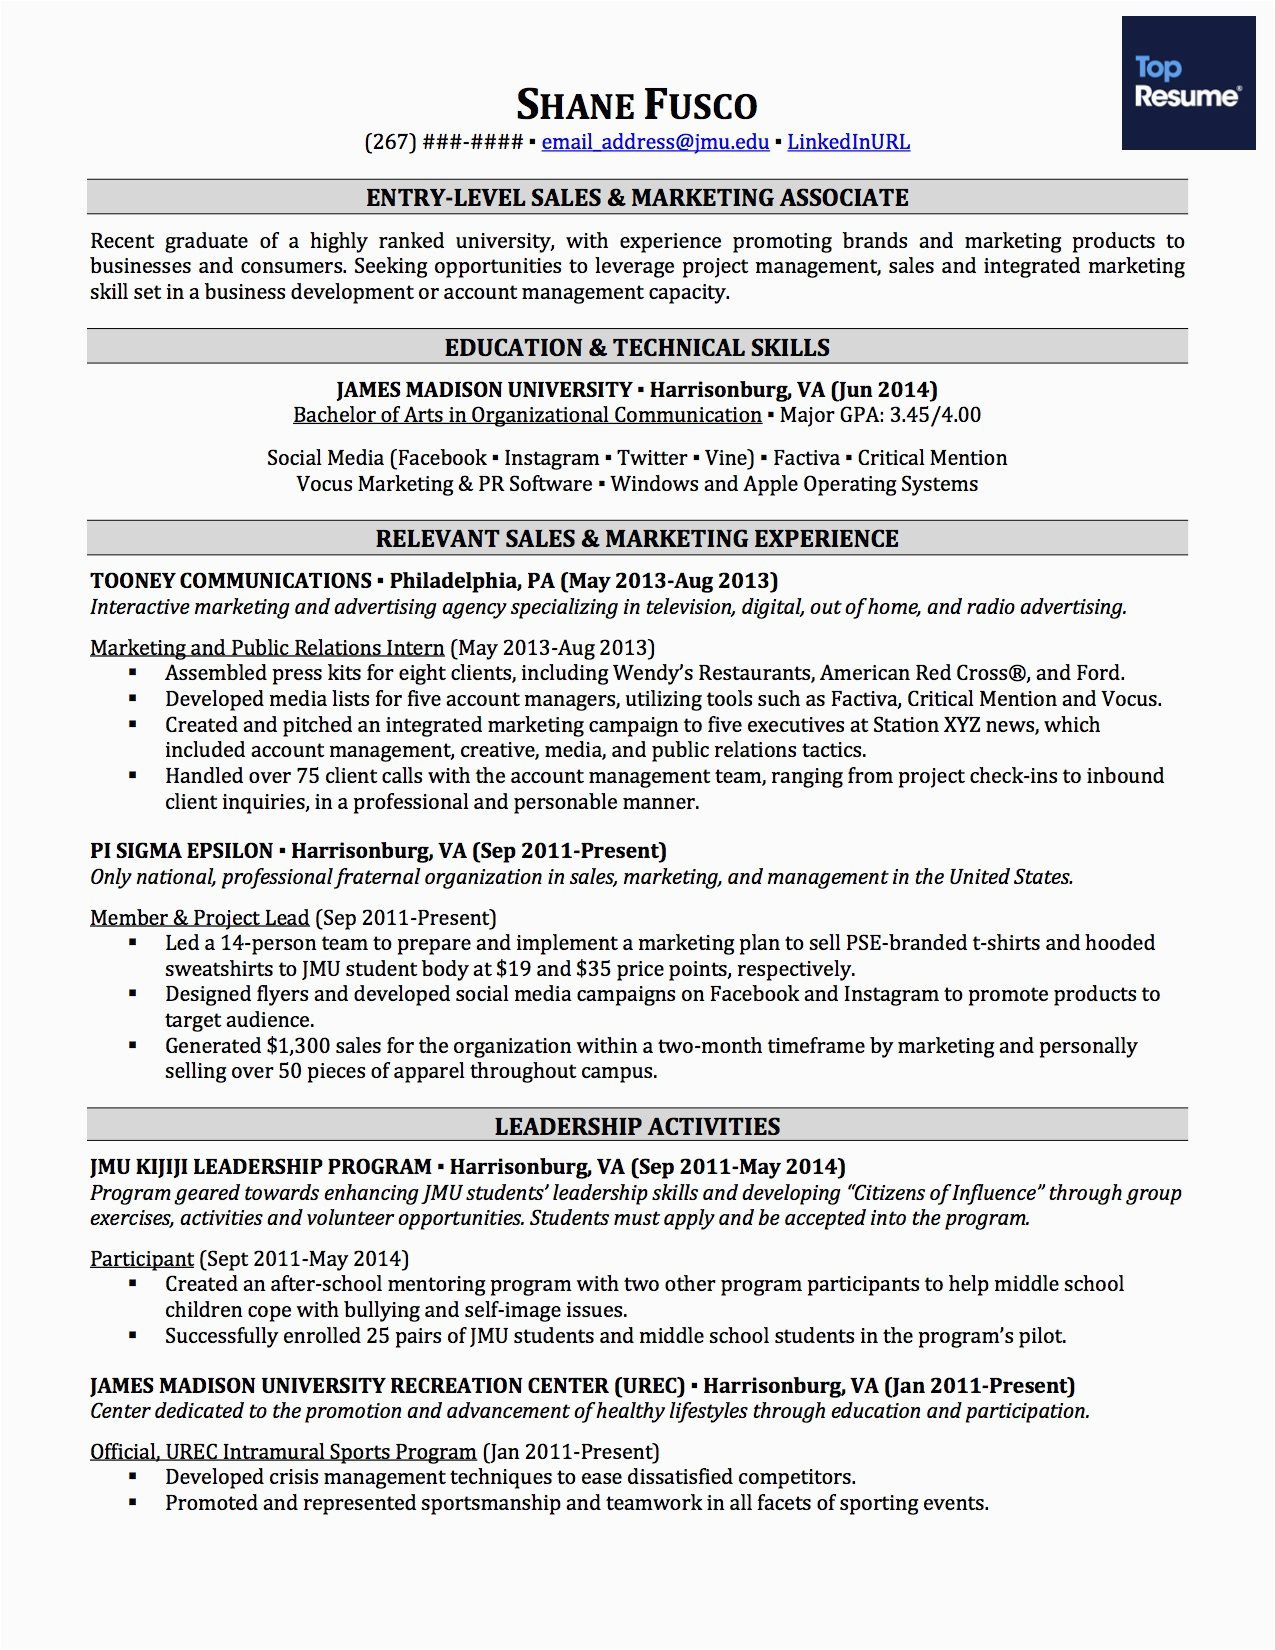 resume template no work experience 25